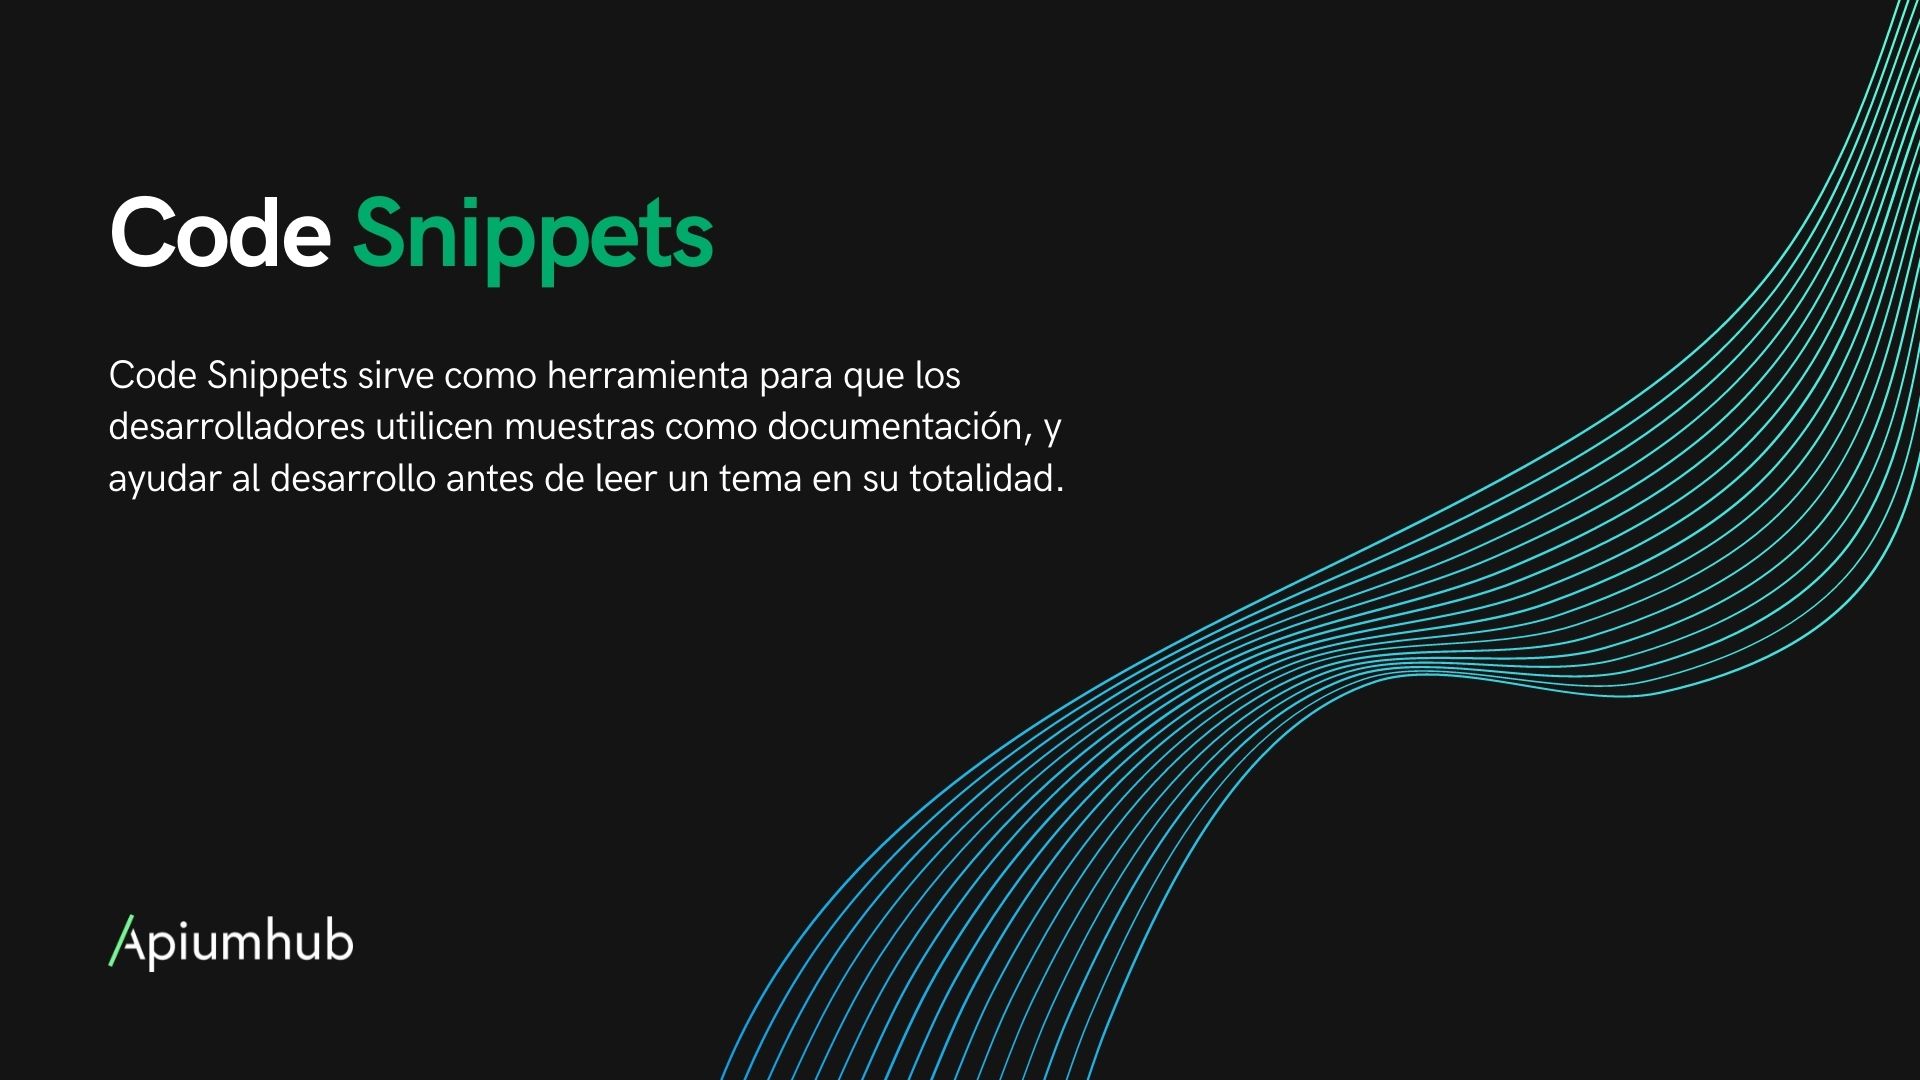 codesnippets_es